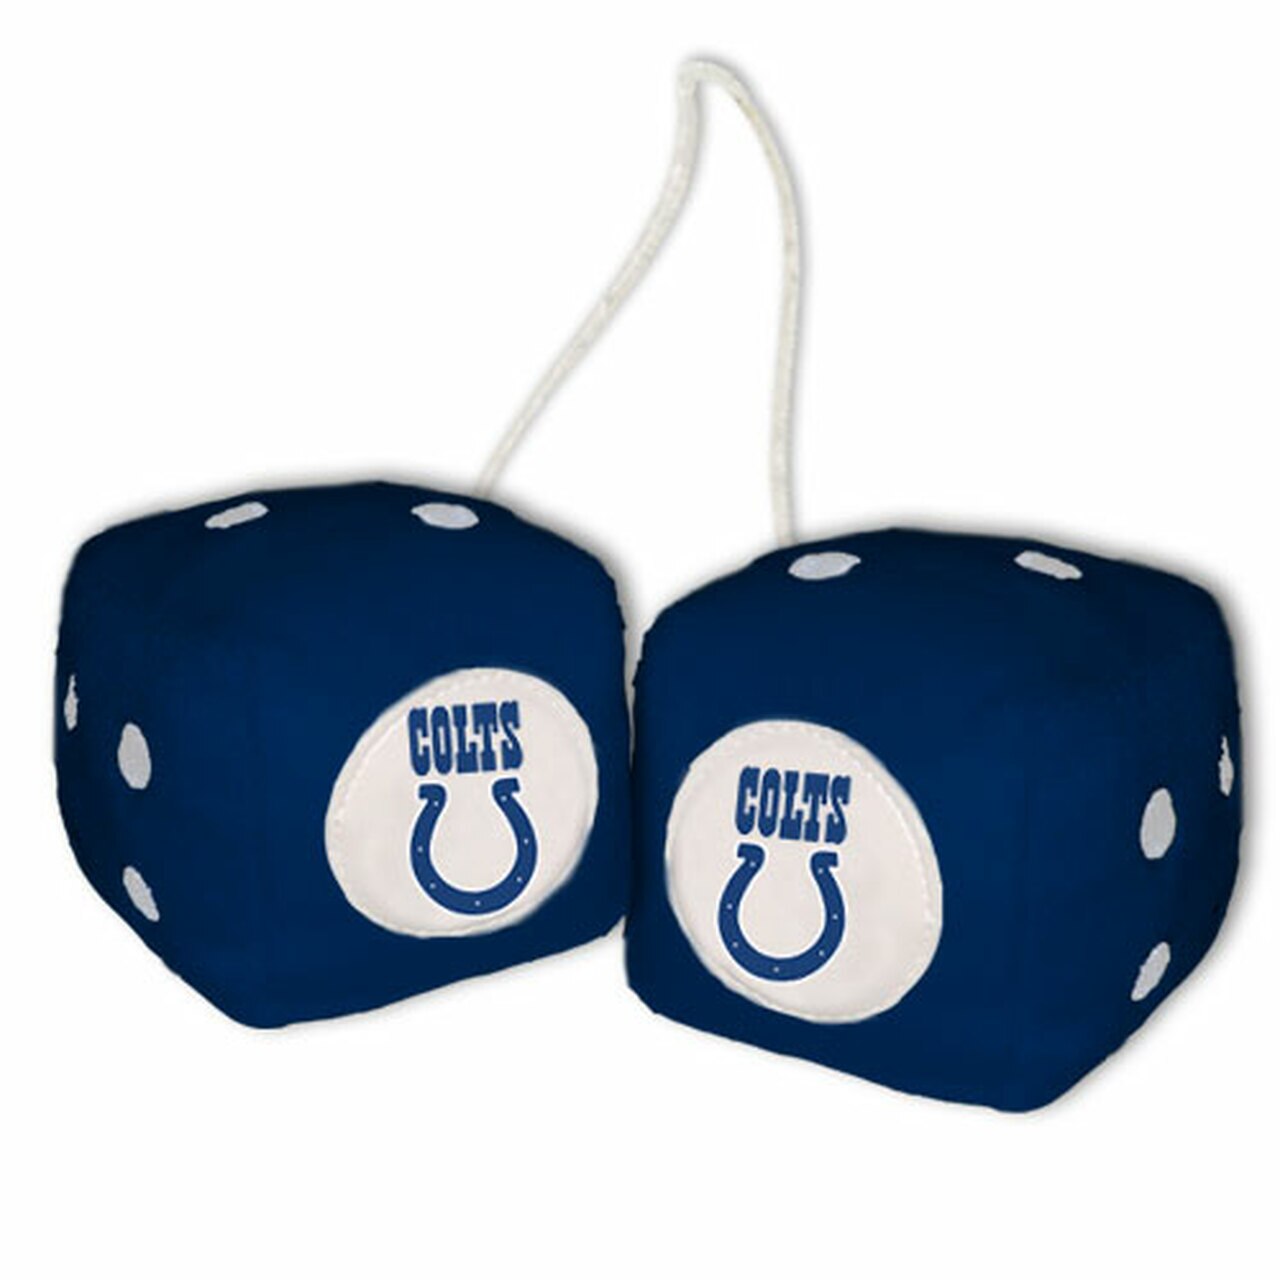 Indianapolis Colts Plush Fuzzy Dice by Fanmats